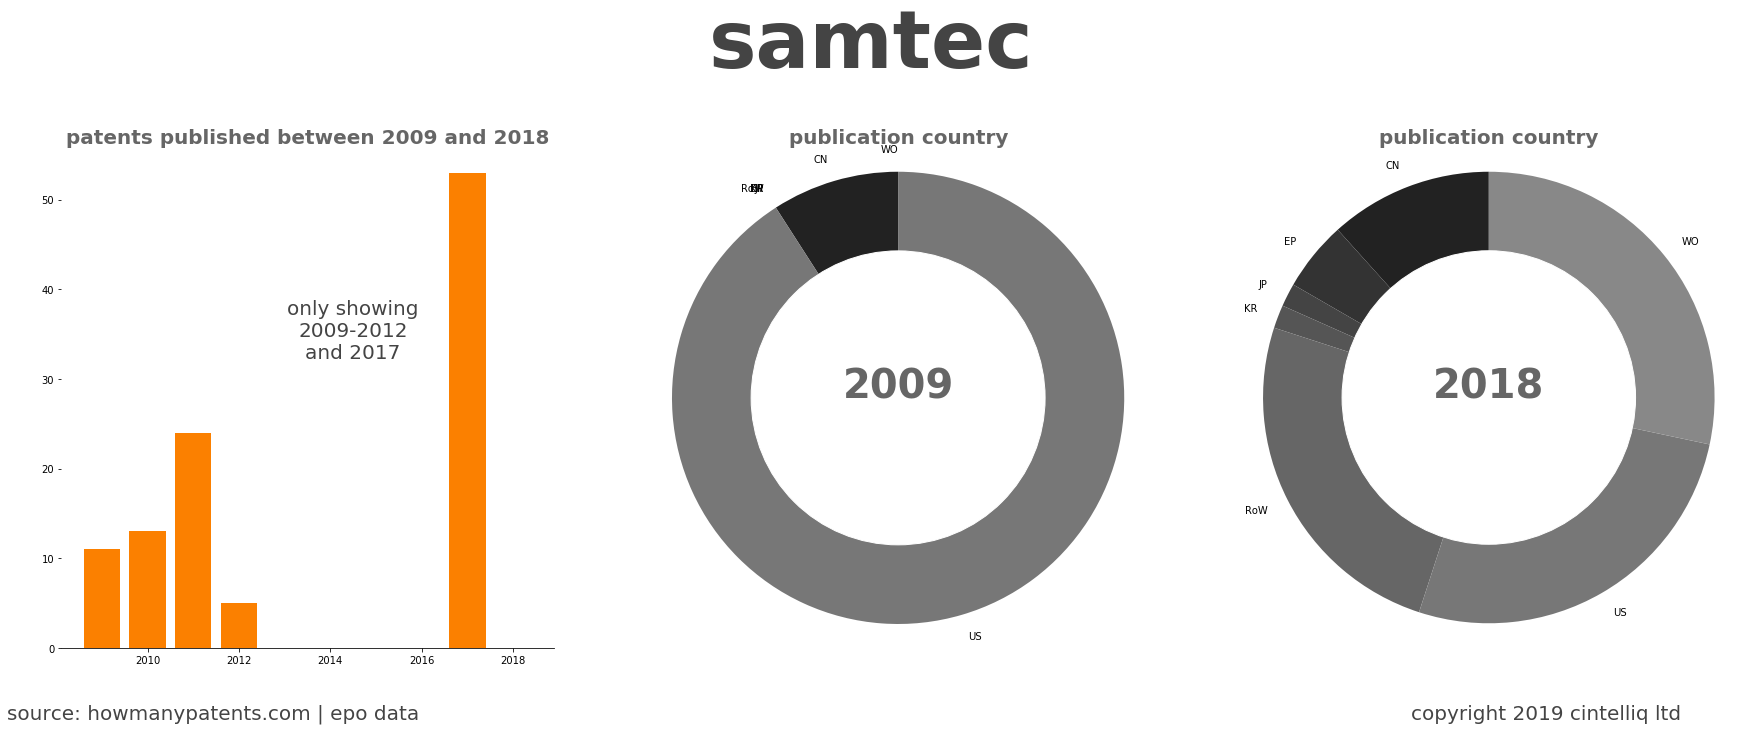 summary of patents for Samtec